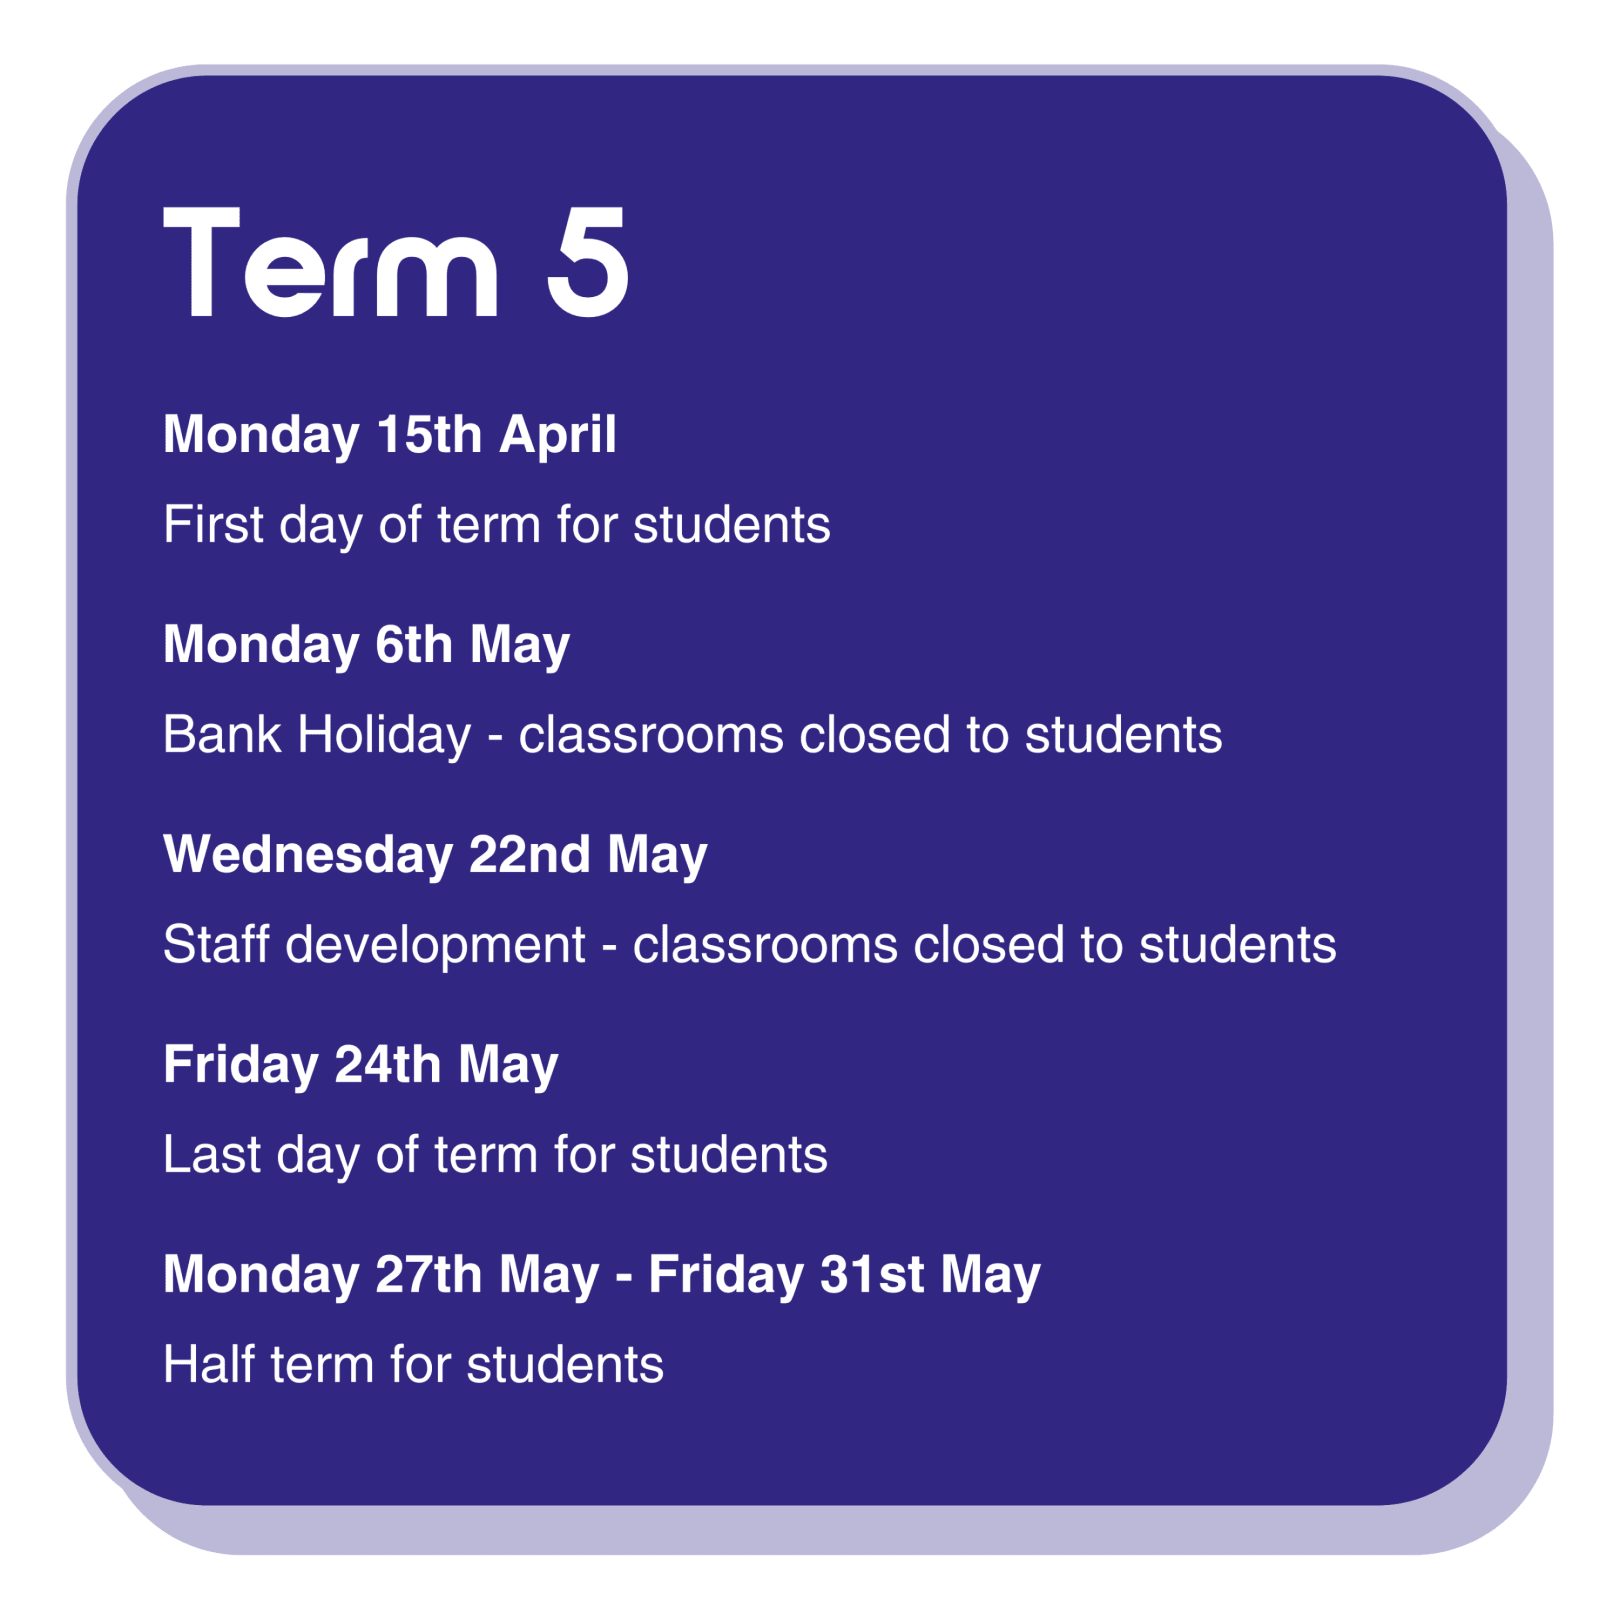 Term 5 dates information infographic with the following text:  Monday 15th April is the first day of term for students. Monday 6th May is a bank Holiday - classrooms are closed to students. Wednesday 22nd May is a staff development day, classrooms are closed to students. Friday 24th May is the last day of term for students. Monday 27th May - Friday 31st May is half term for students.